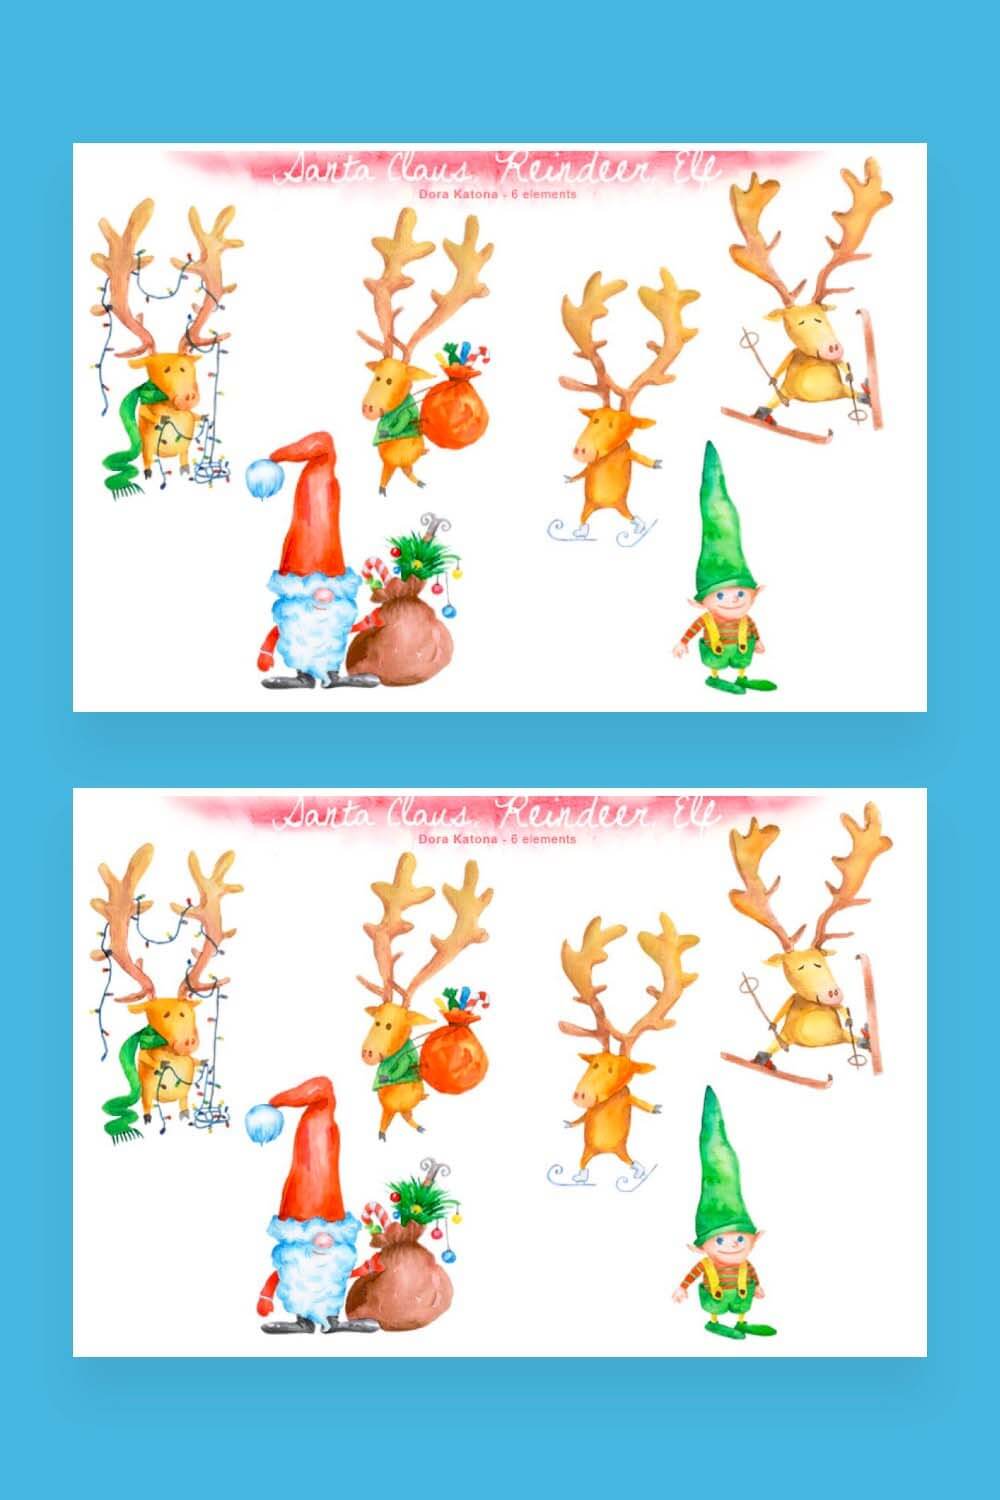 Two pictures of Merry Christmas, santa claus, elf reindeer.